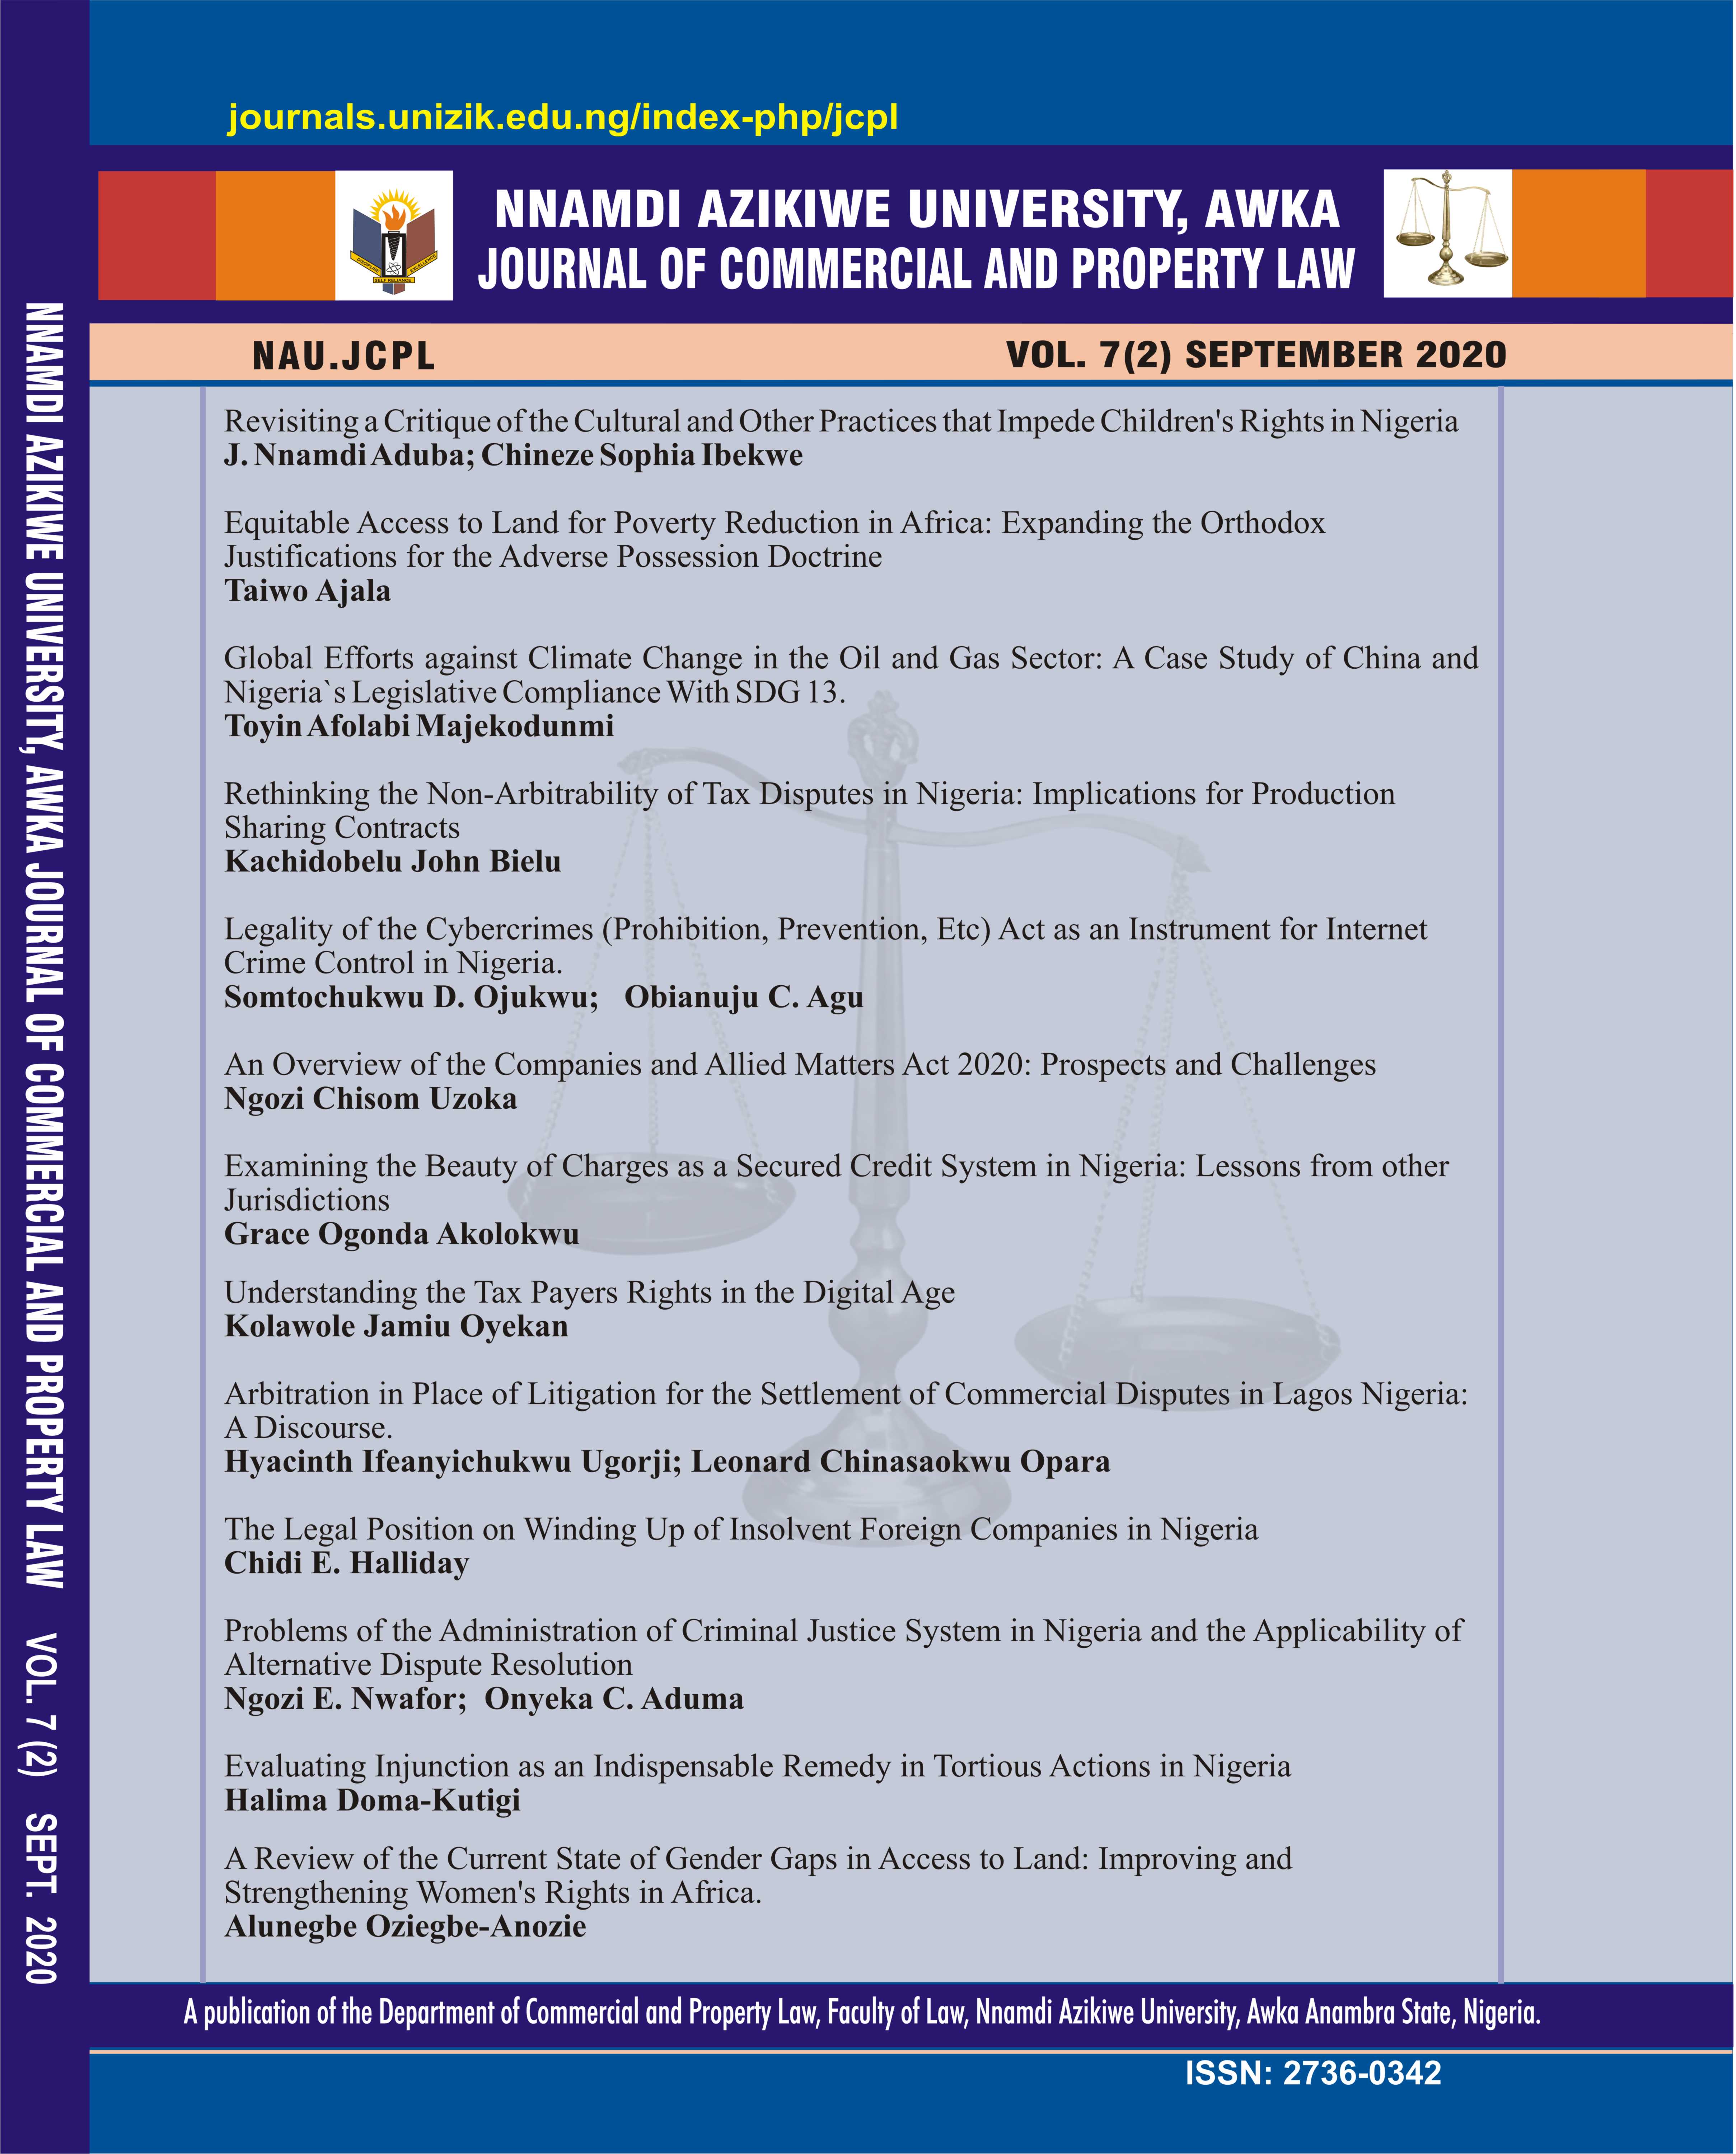 					View Vol. 7 No. 2 (2020): NNAMDI AZIKIWE UNIVERSITY JOURNAL OF COMMERCIAL AND PROPERTY LAW
				